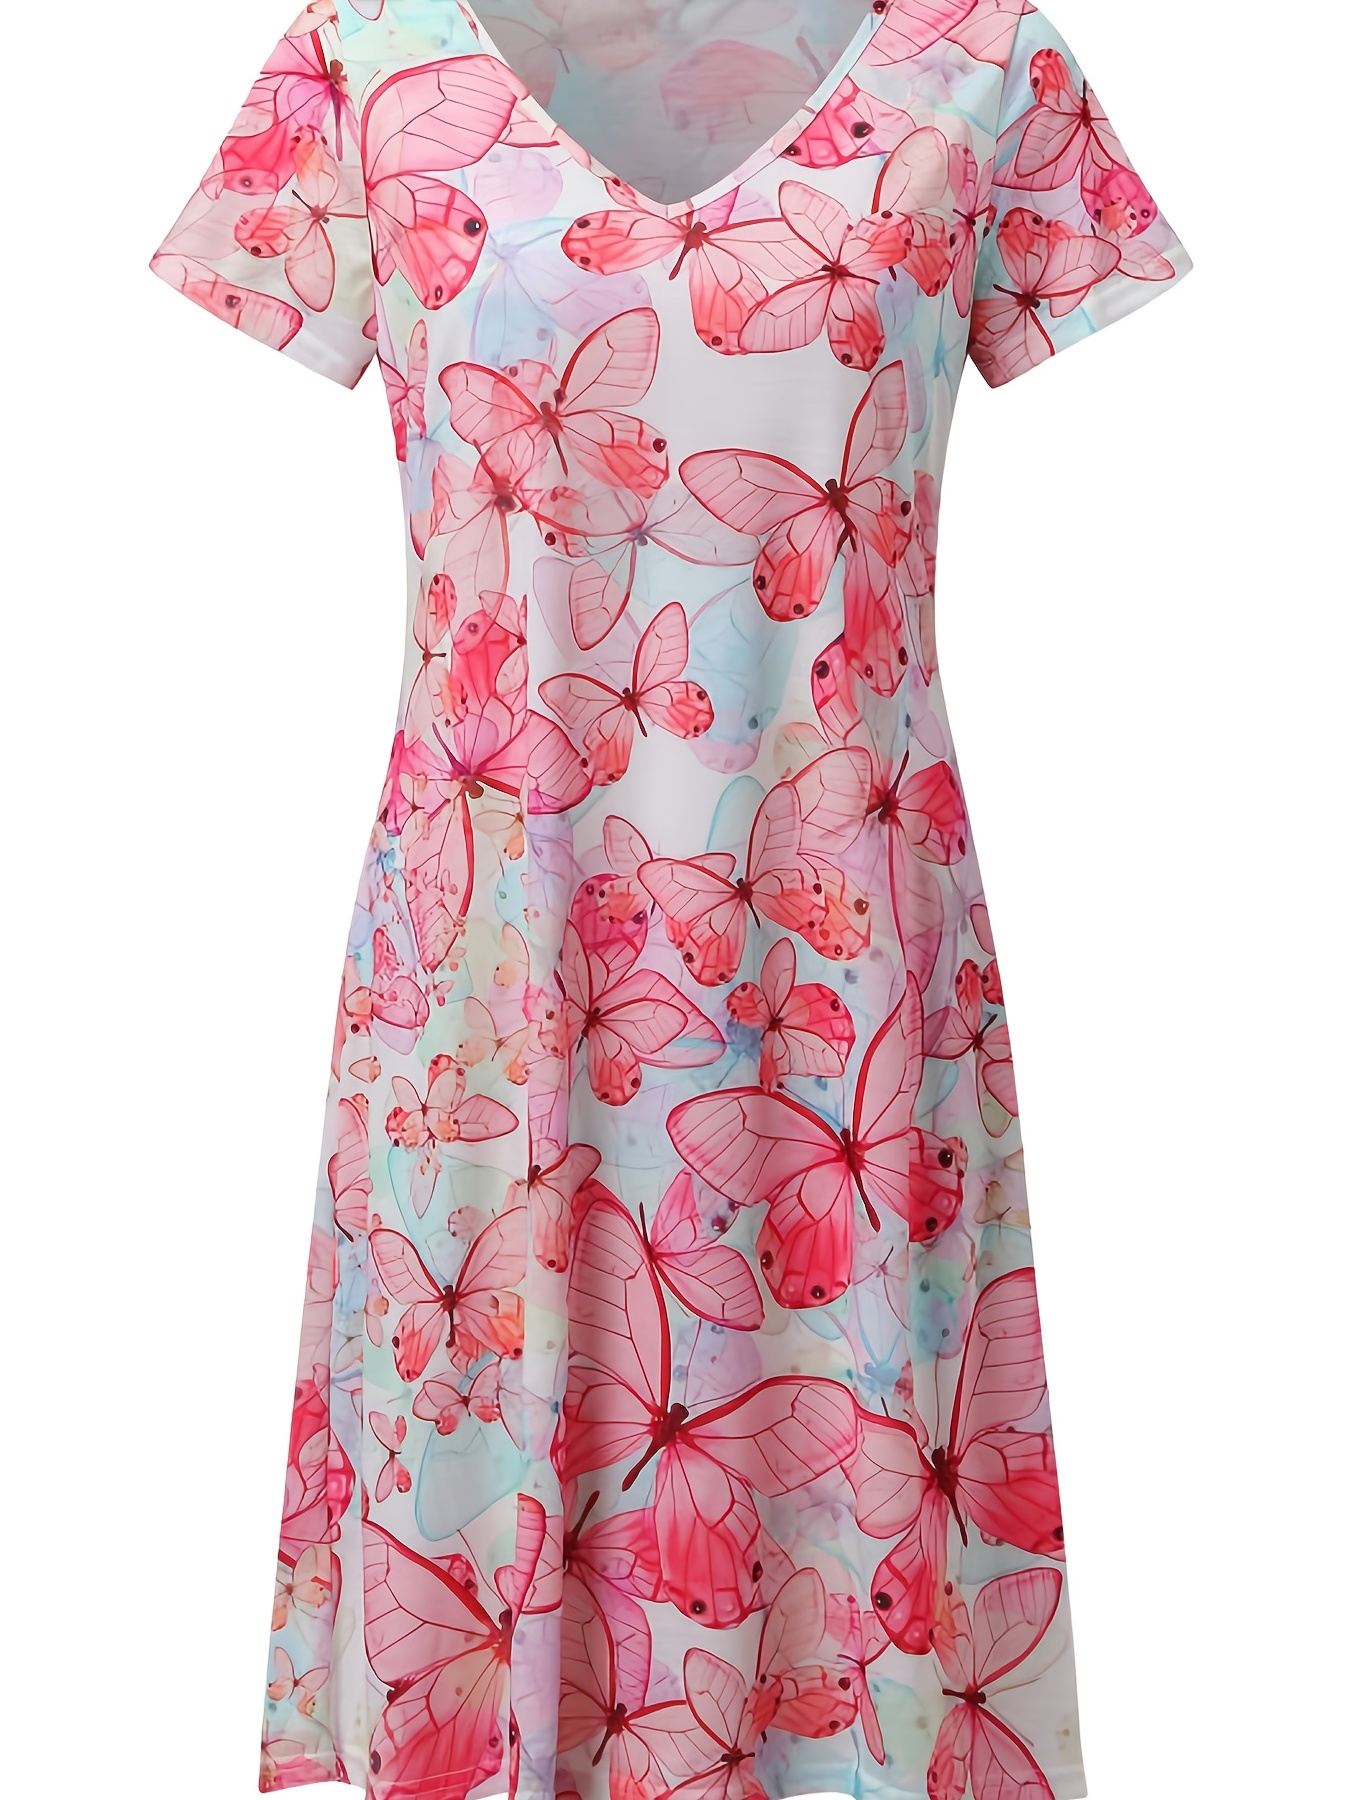 butterfly print dress v neck short sleeve dress casual every day dress womens clothing